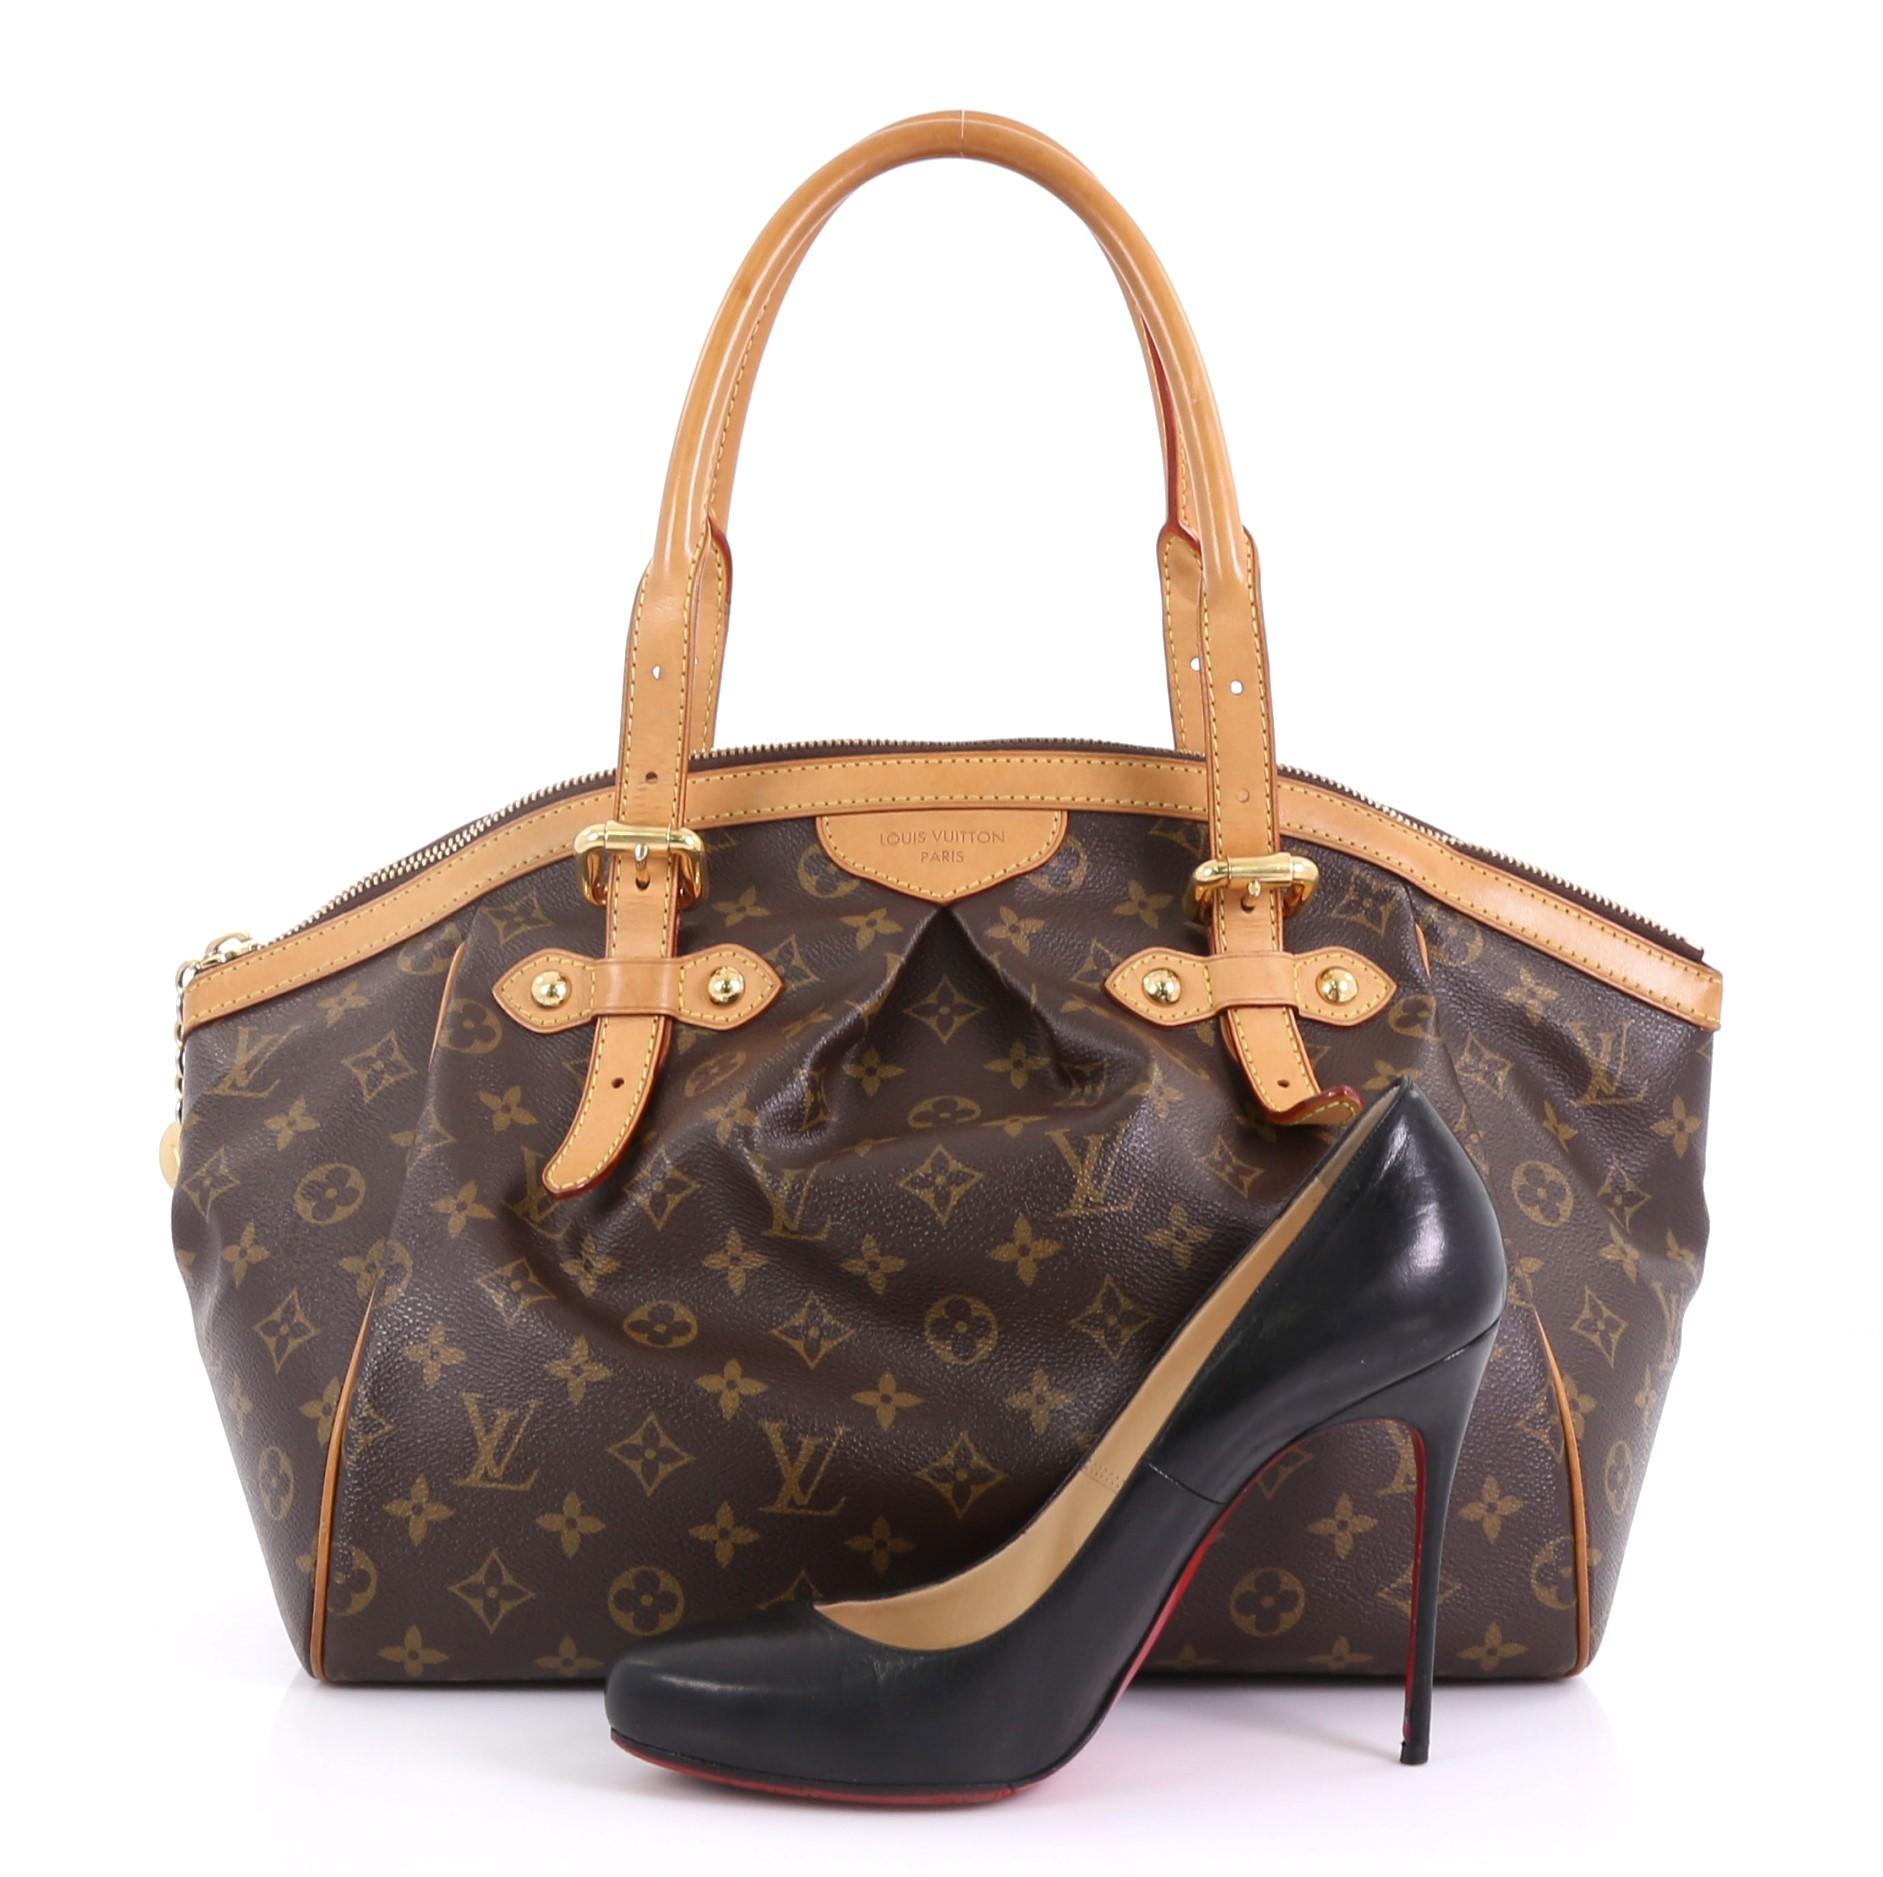 This Louis Vuitton Tivoli Handbag Monogram Canvas GM, crafted from brown monogram coated canvas, features dual rolled handles, subtle pleats in the middle, and gold-tone hardware. Its top zip closure opens to a brown fabric interior with slip